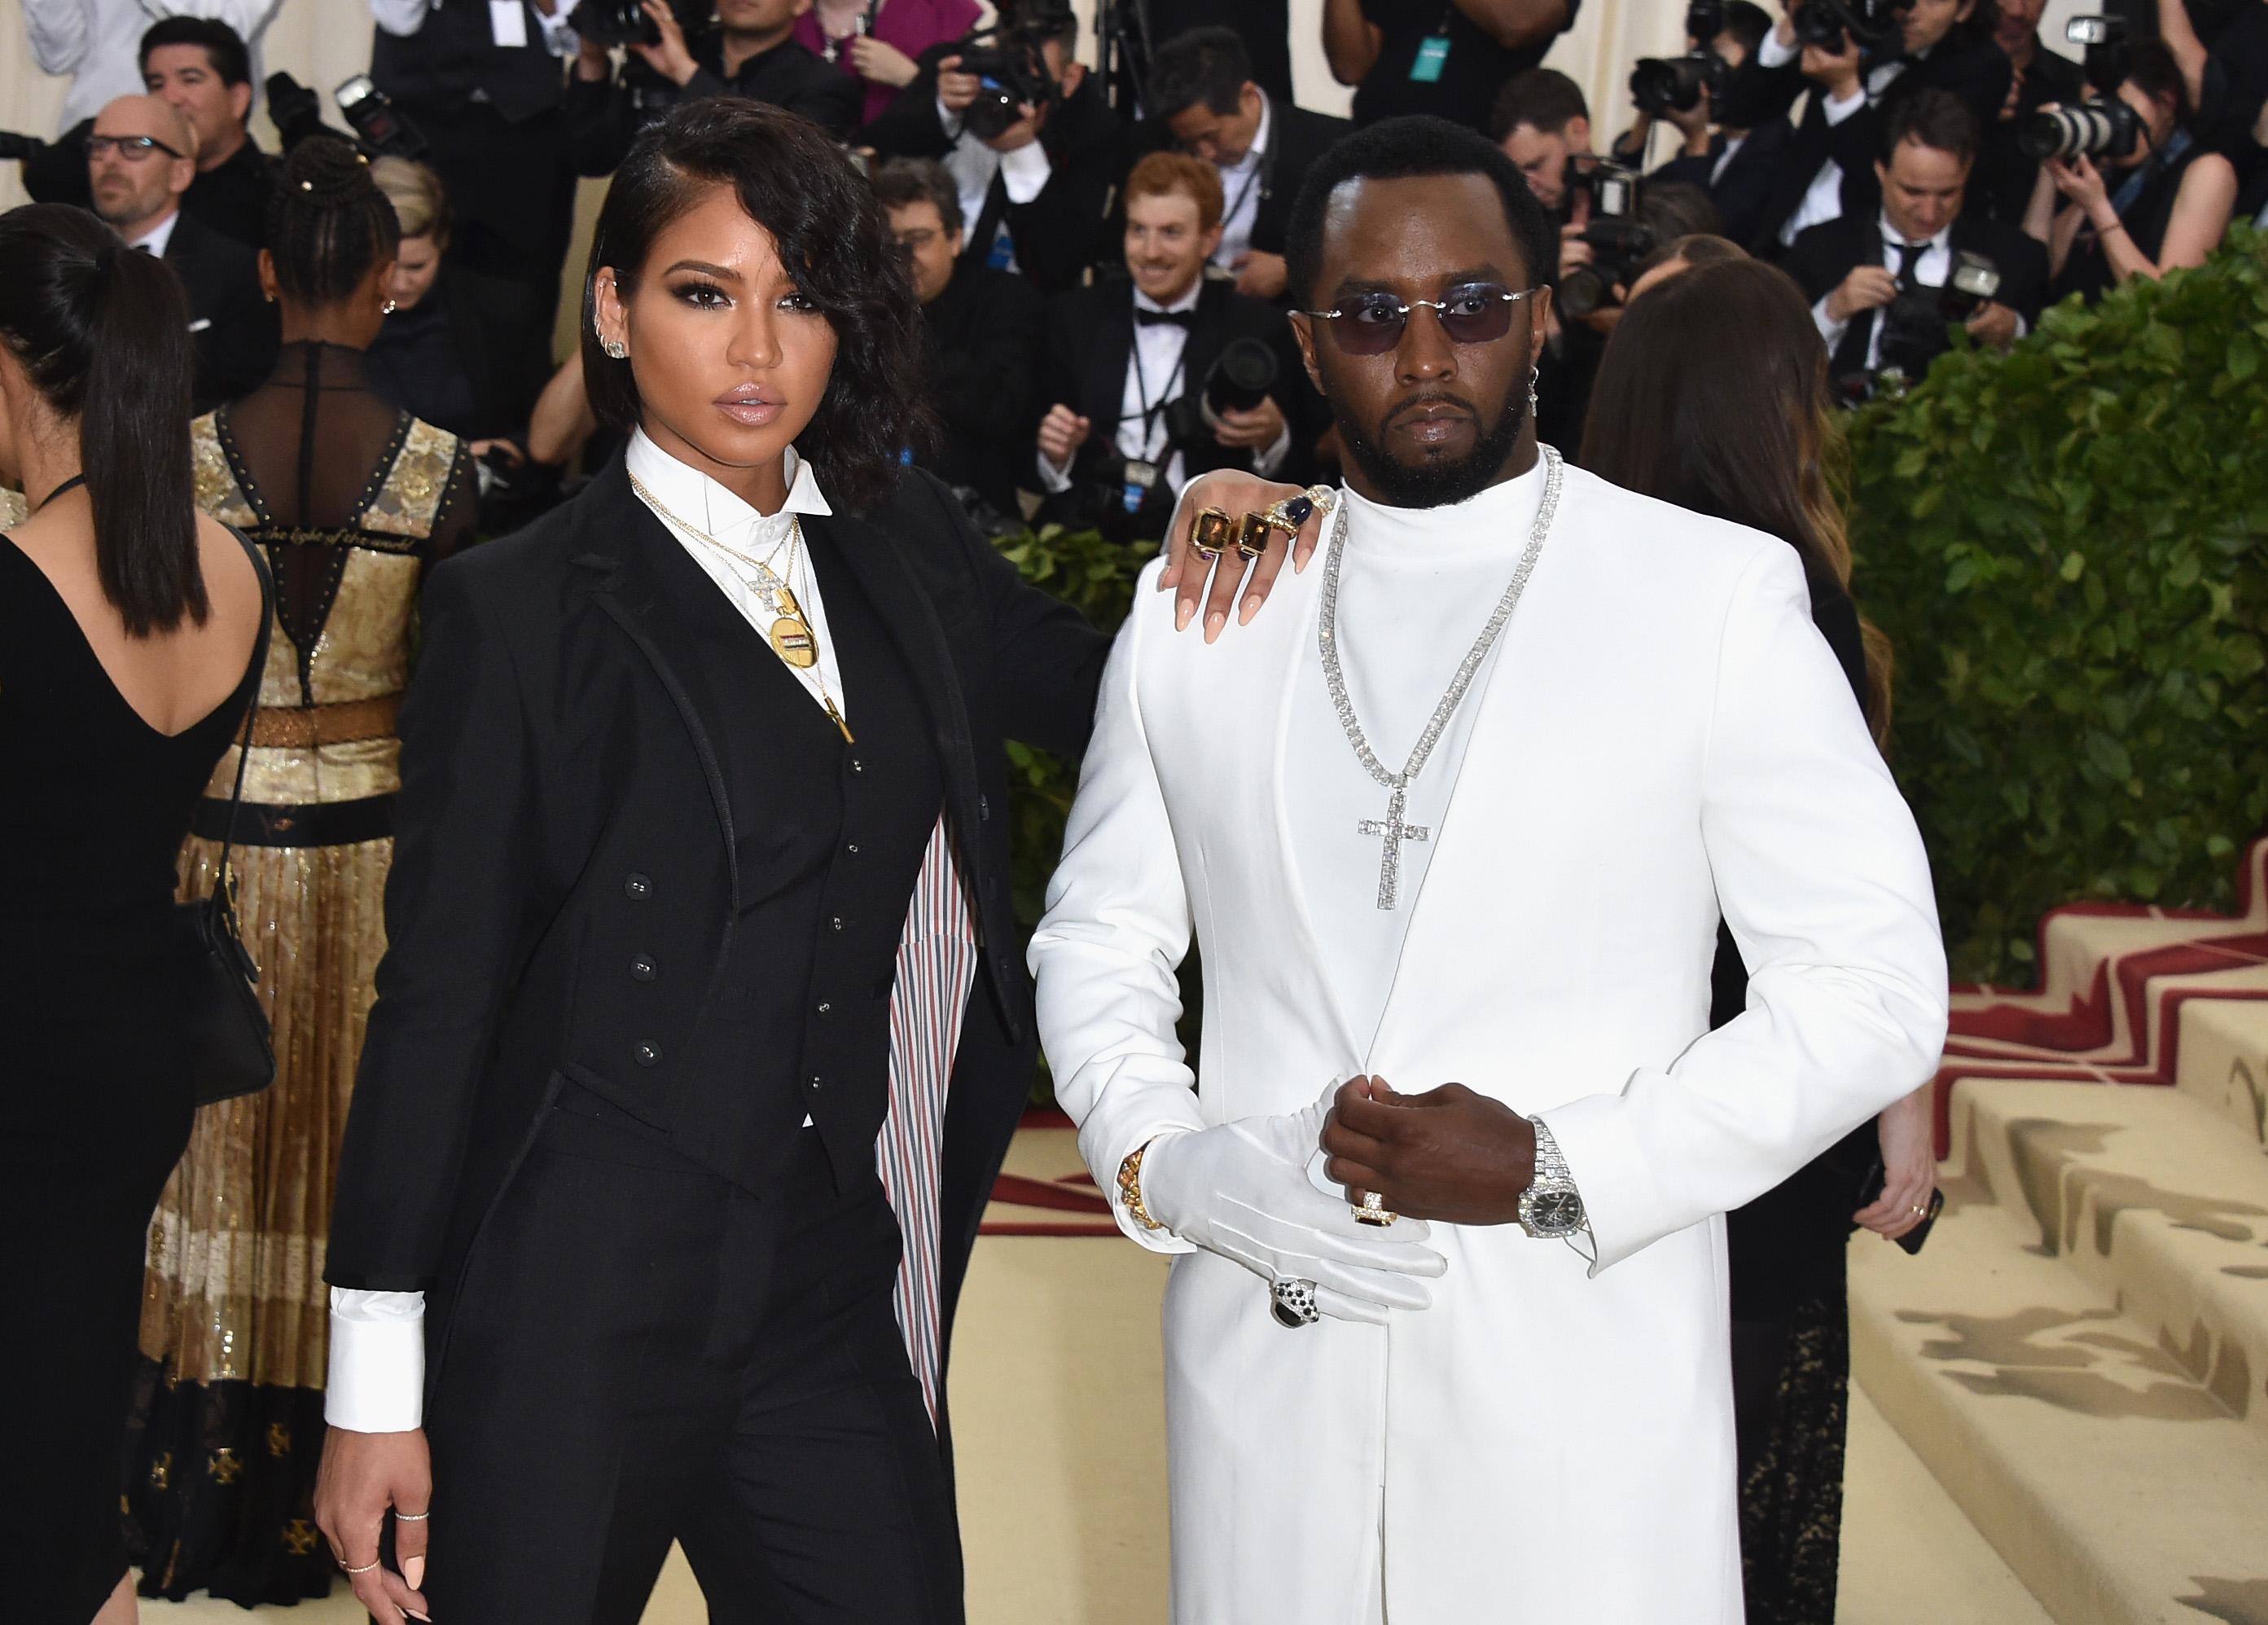 Who Is Diddy's Girlfriend Now? Get the Details on Joie Chavis